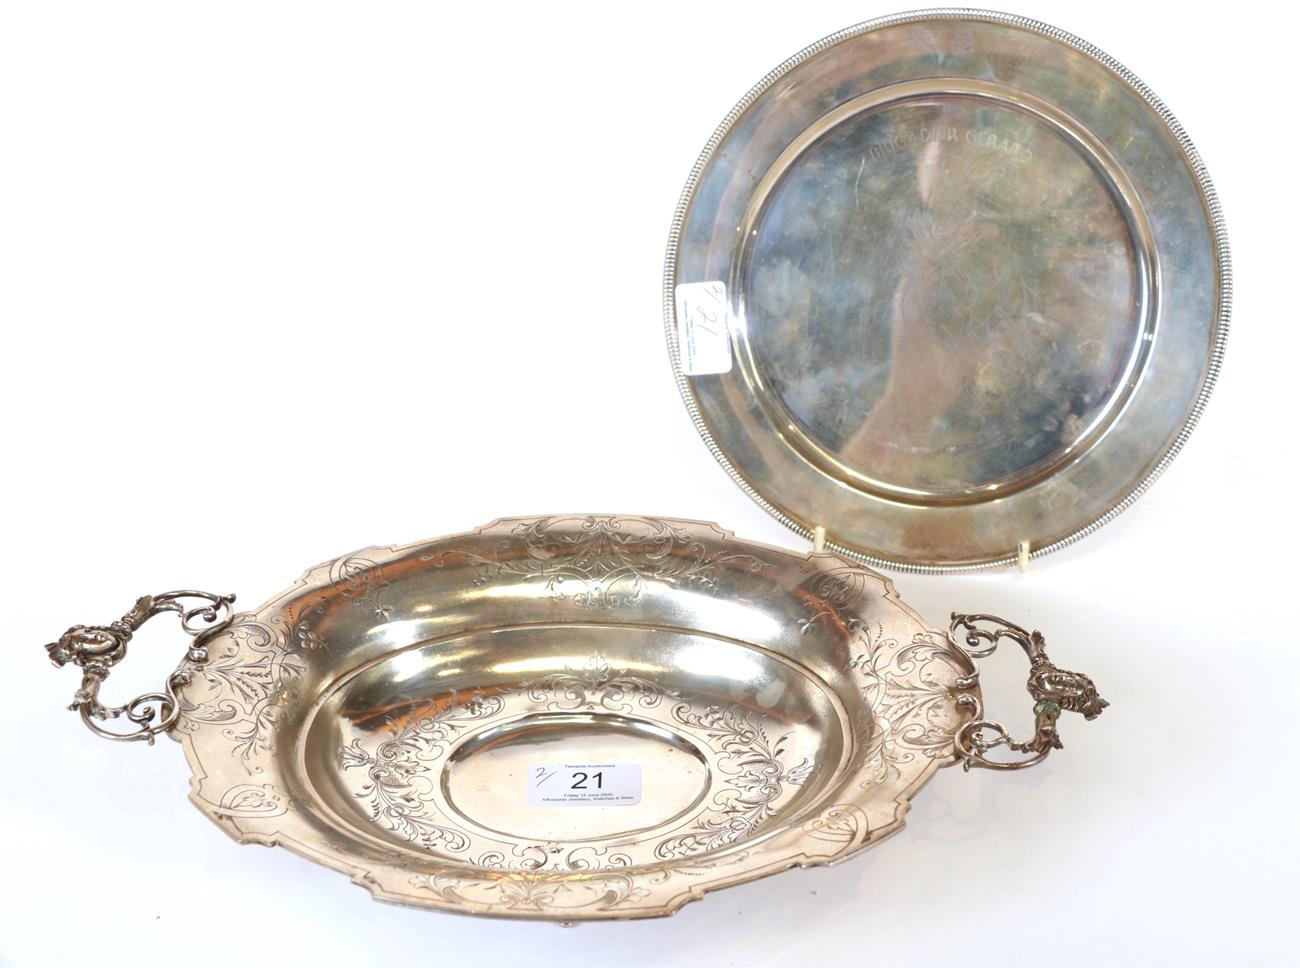 Lot 21 - An Elizabeth II Silver Dish, by Richard Comyns, London, 1972, Further Numbered '0622', circular and